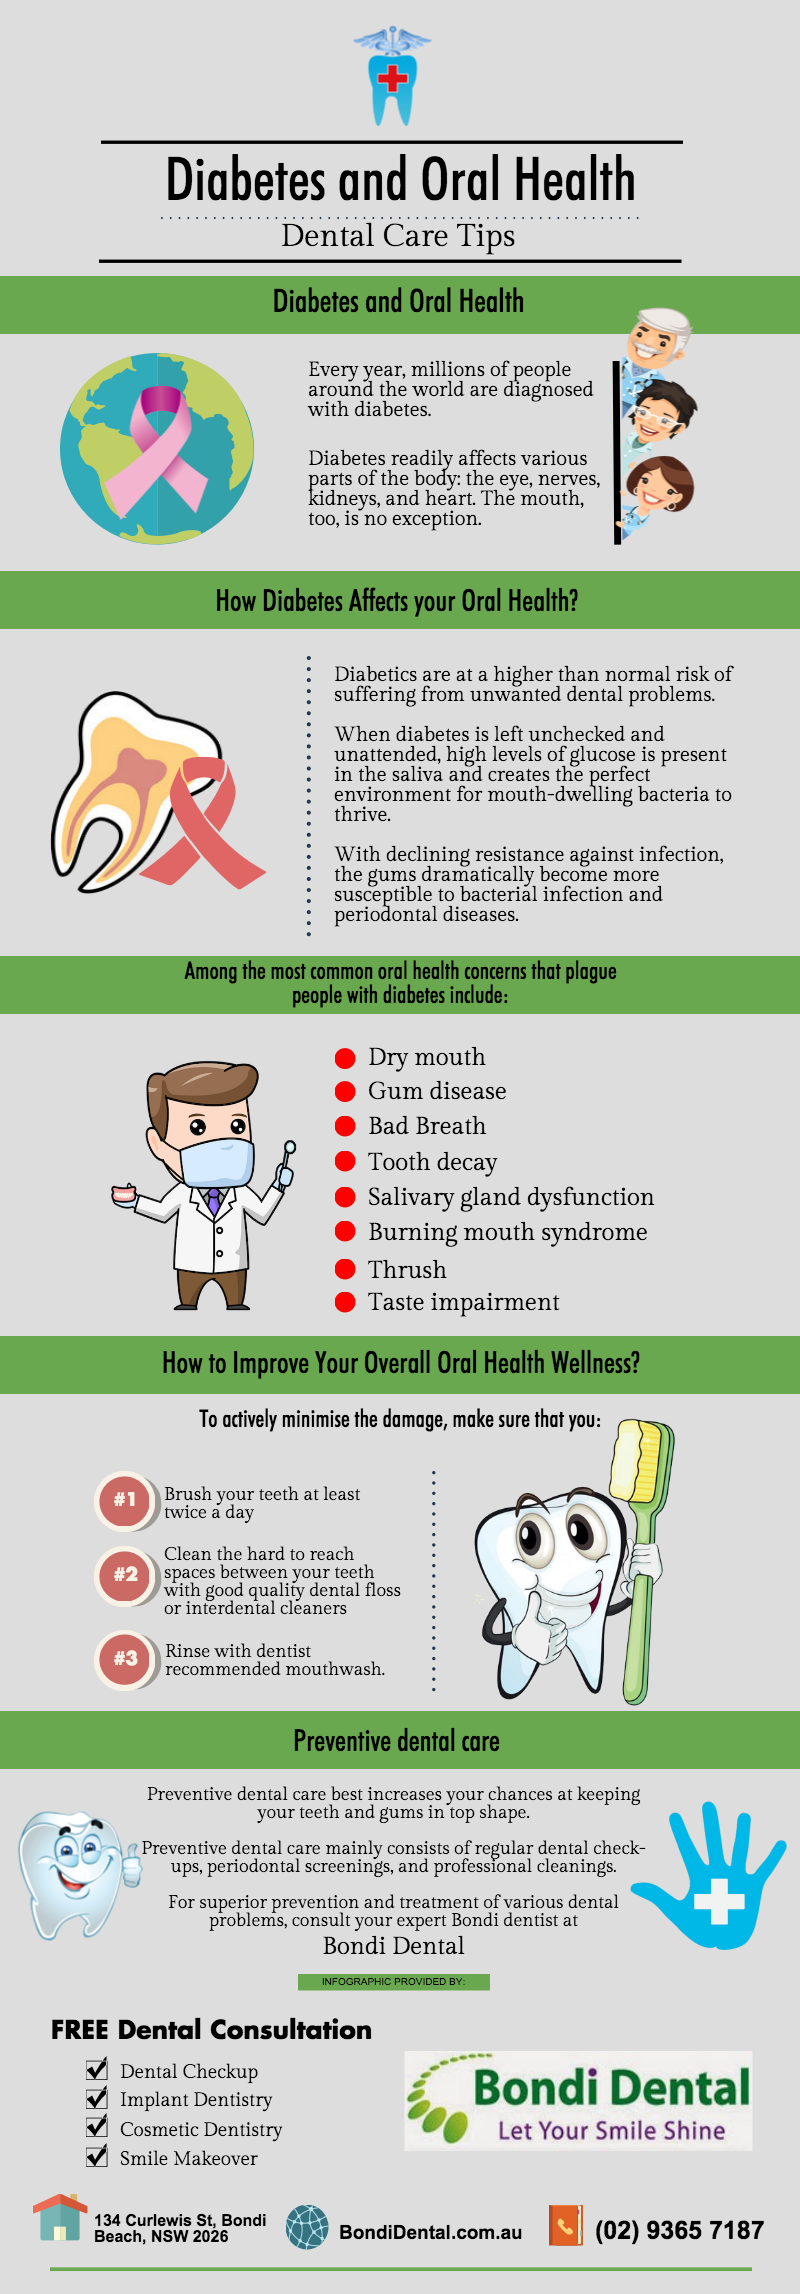 Dental Health For People With Diabetes